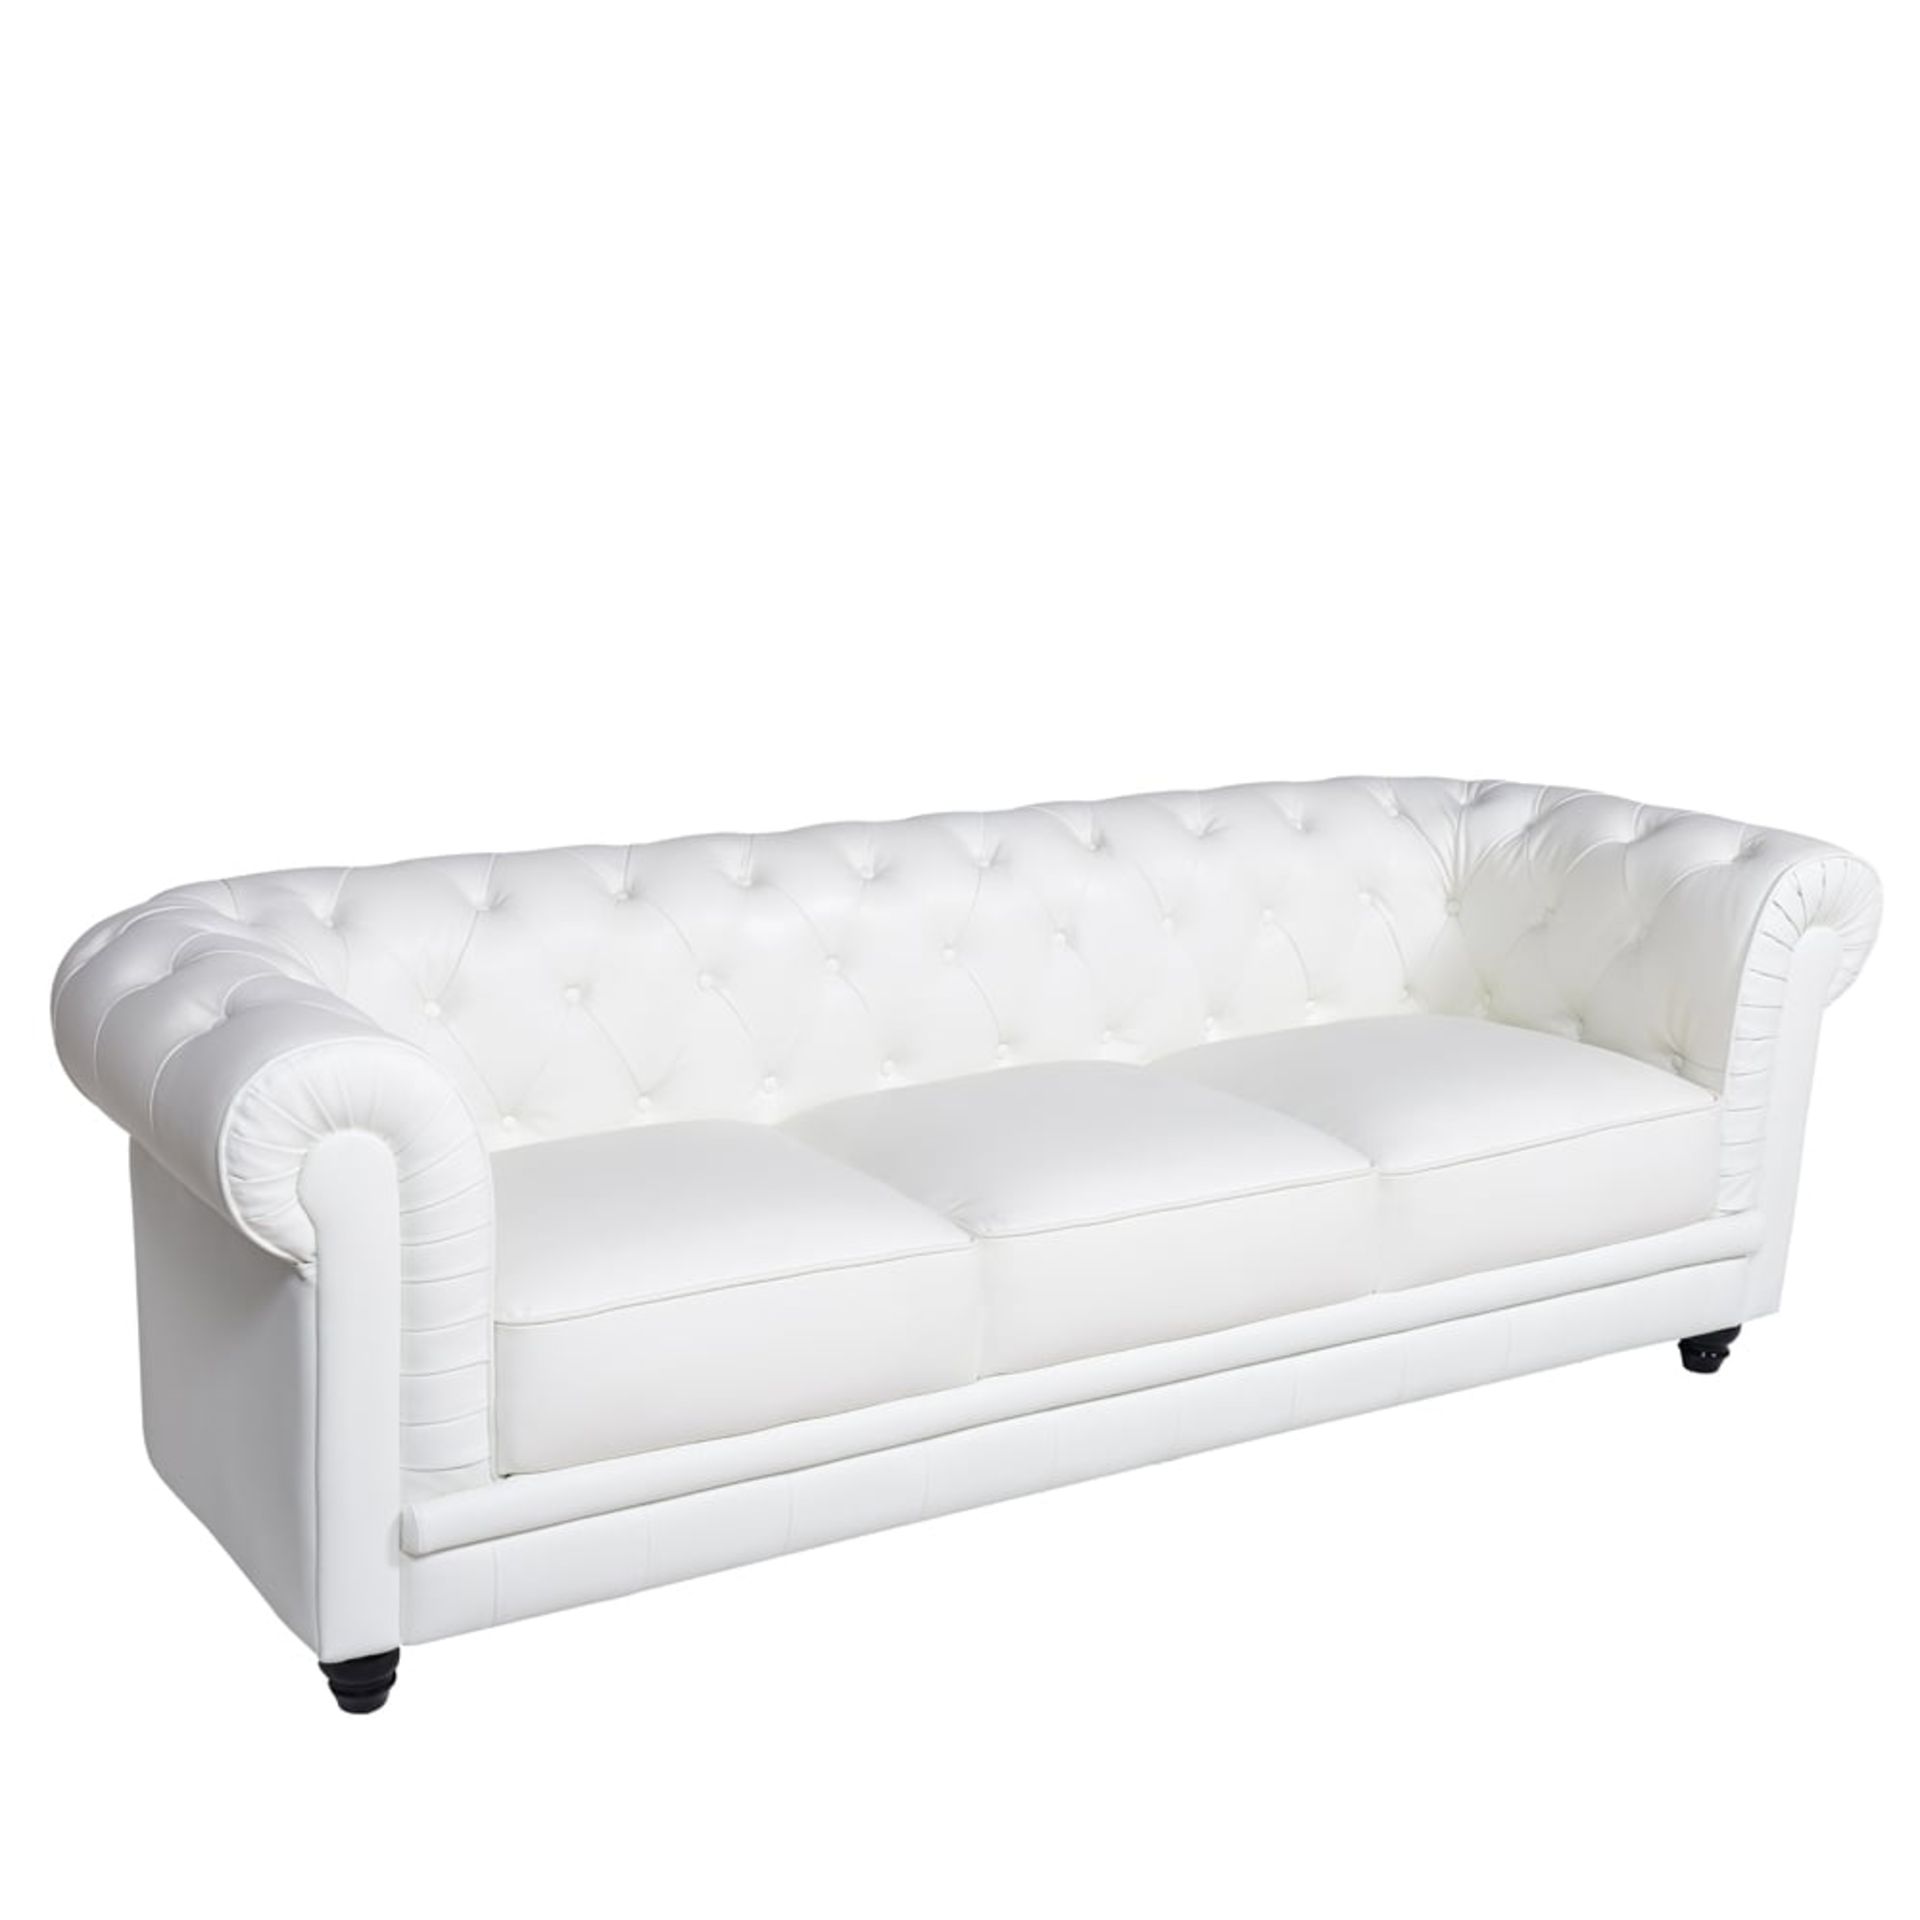 Empoli White Leather 3 Seater Sofa Handmade Chesterfield button back leather sofa in snow white. - Image 2 of 6